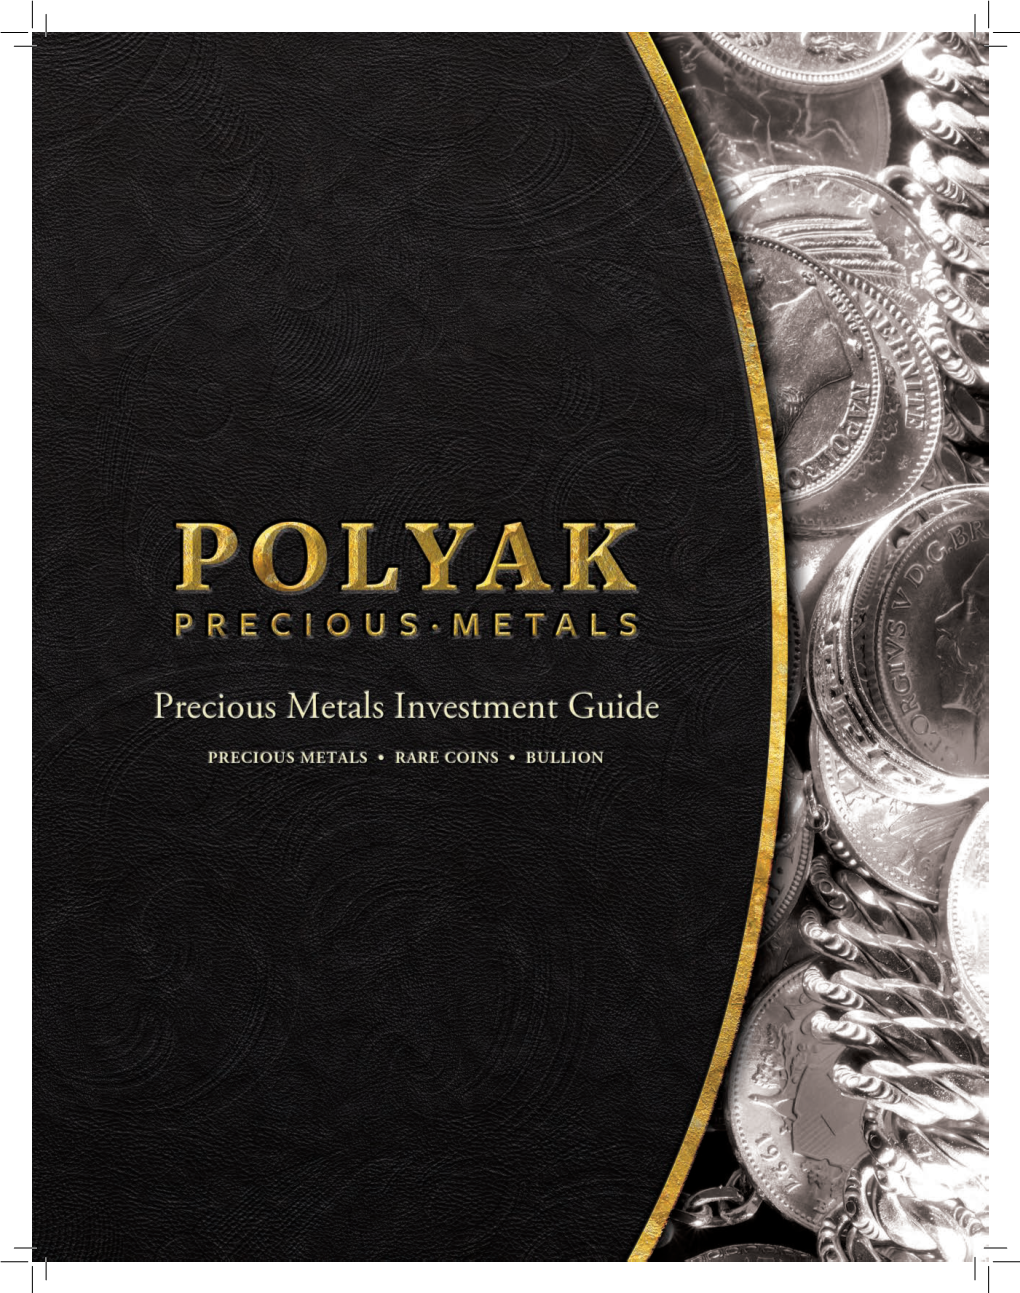 Our Precious Metals Investment Guide